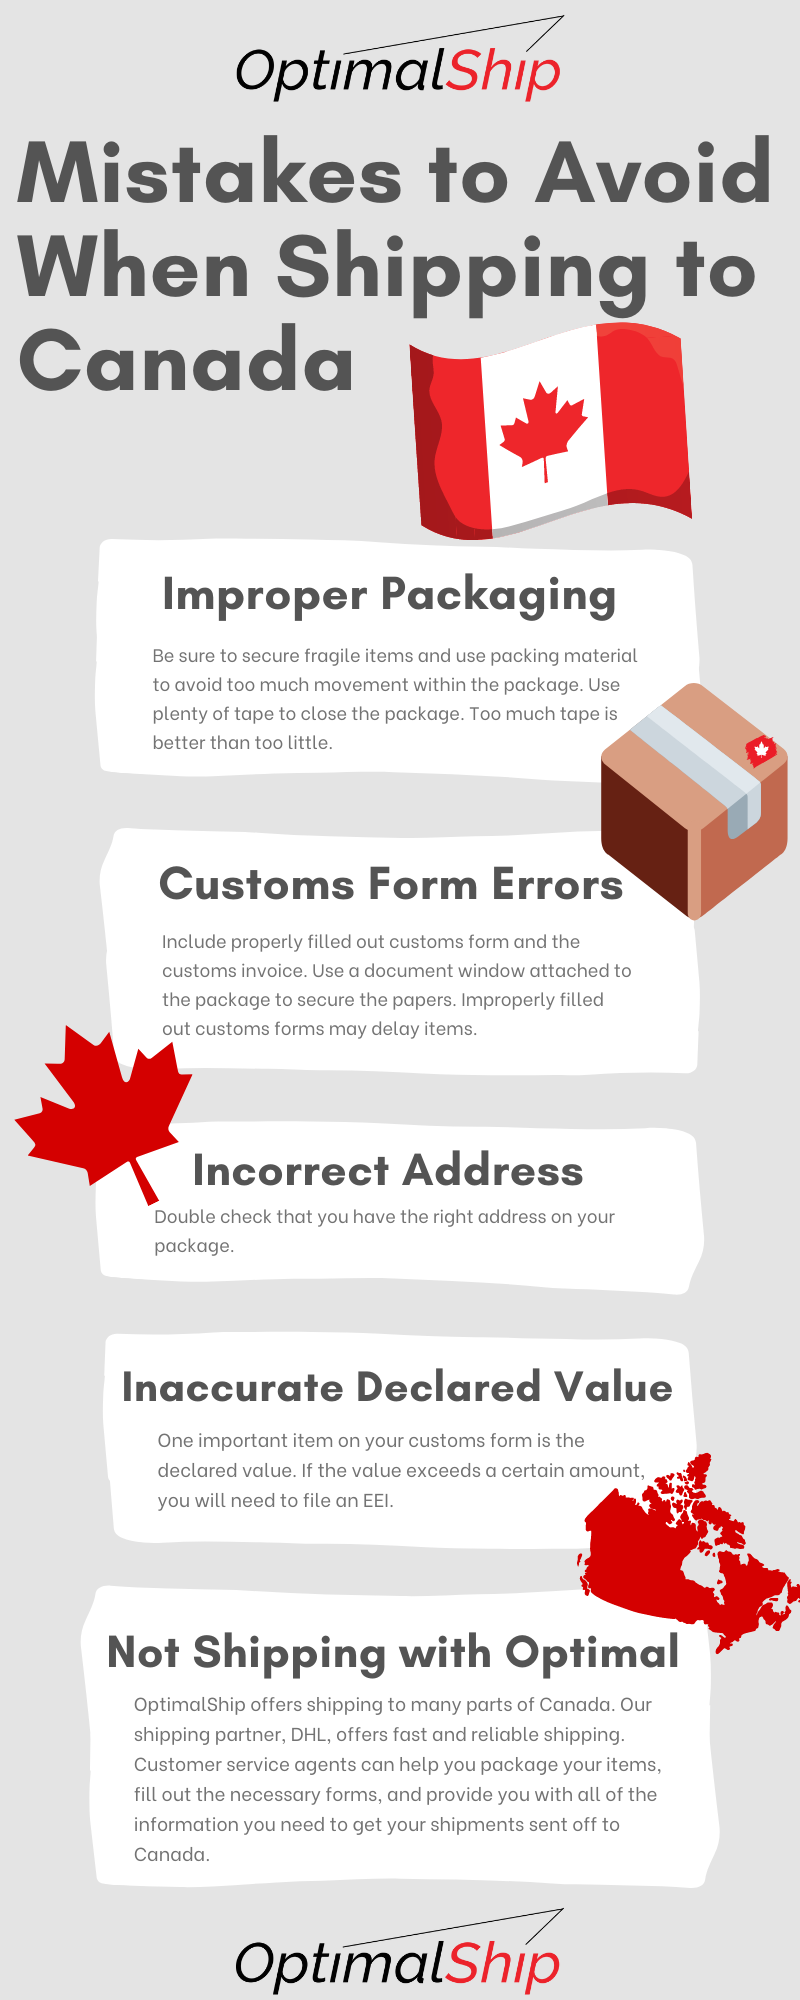 Mistakes to Avoid When Shipping to Canada